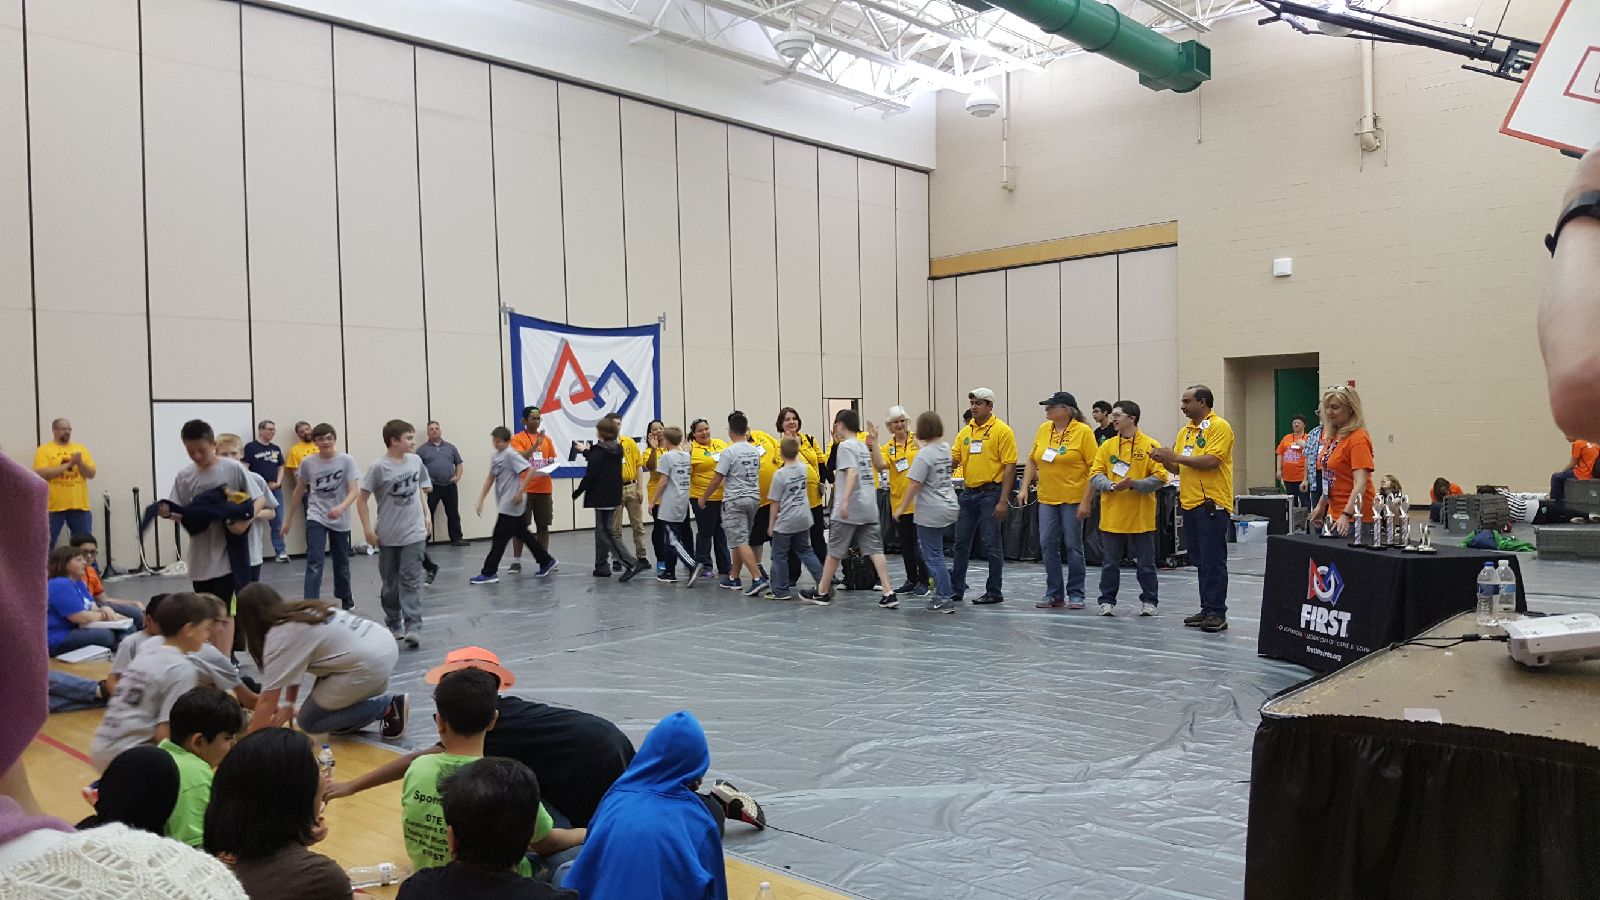 McCollough-Unis in the News: Robotics Competition in December